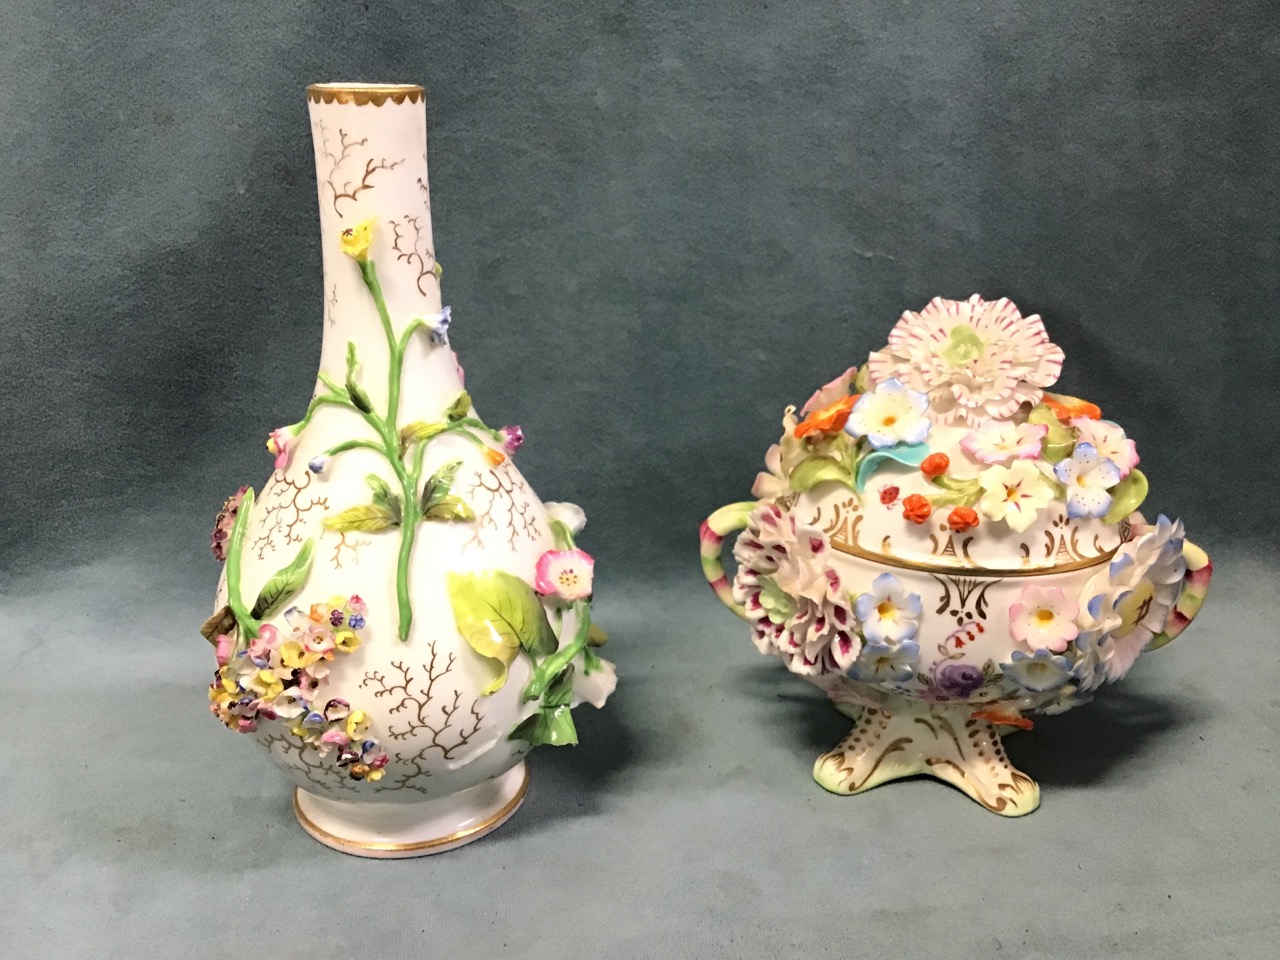 An early C19th Coalport porcelain Coalbrookdale floral encrusted bottle vase - 6in; and a C20th